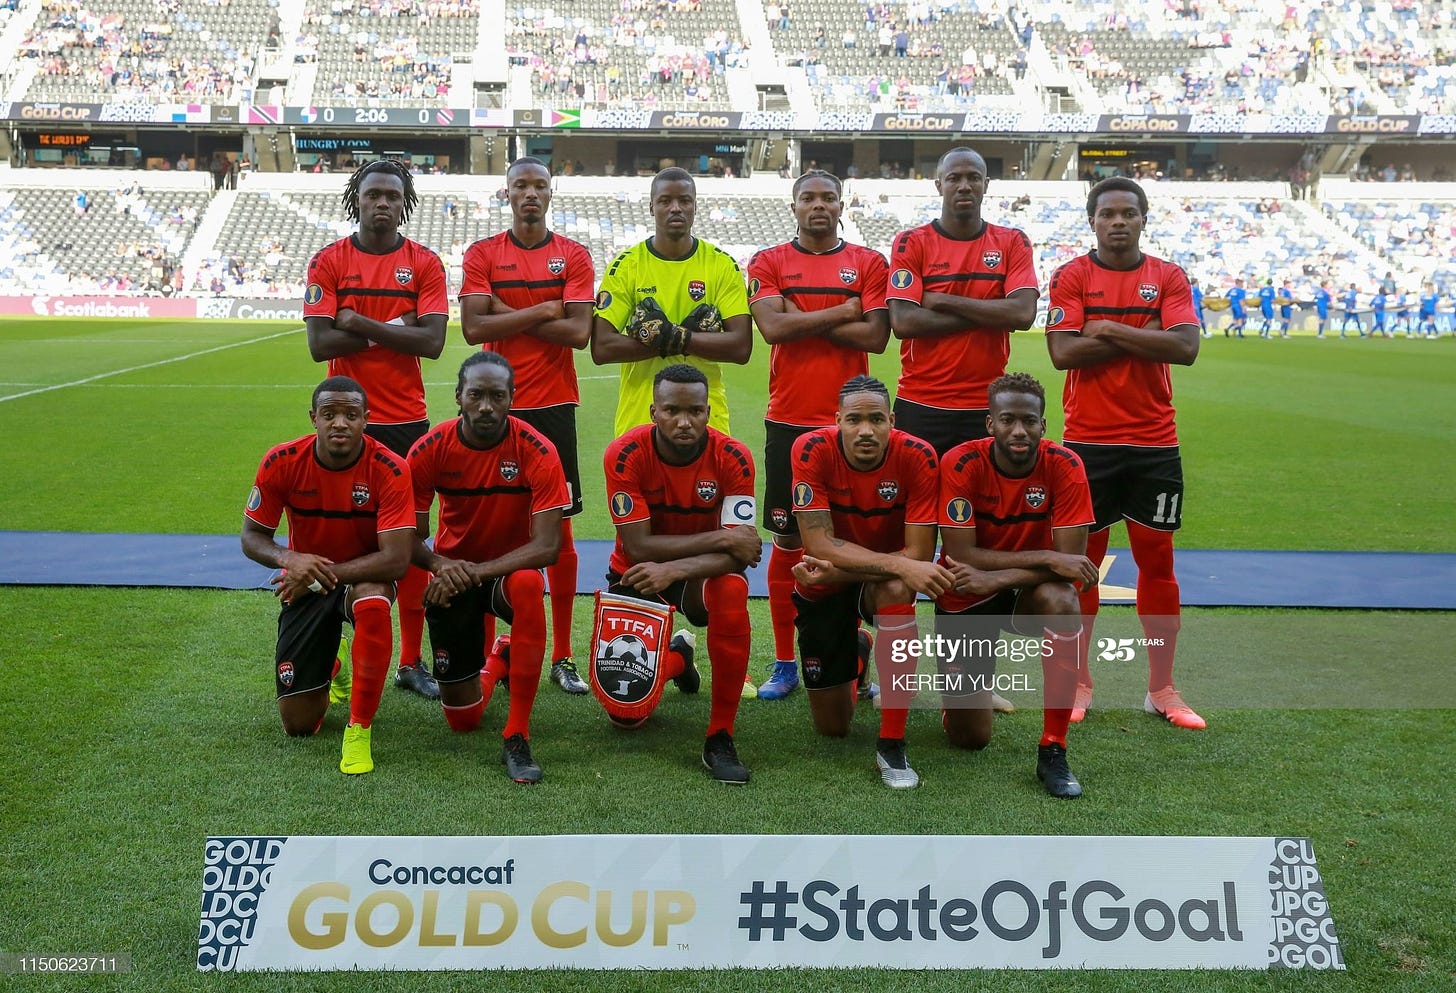 FBL-CONCACAF-GOLDCUP-PAN-TTO : News Photo